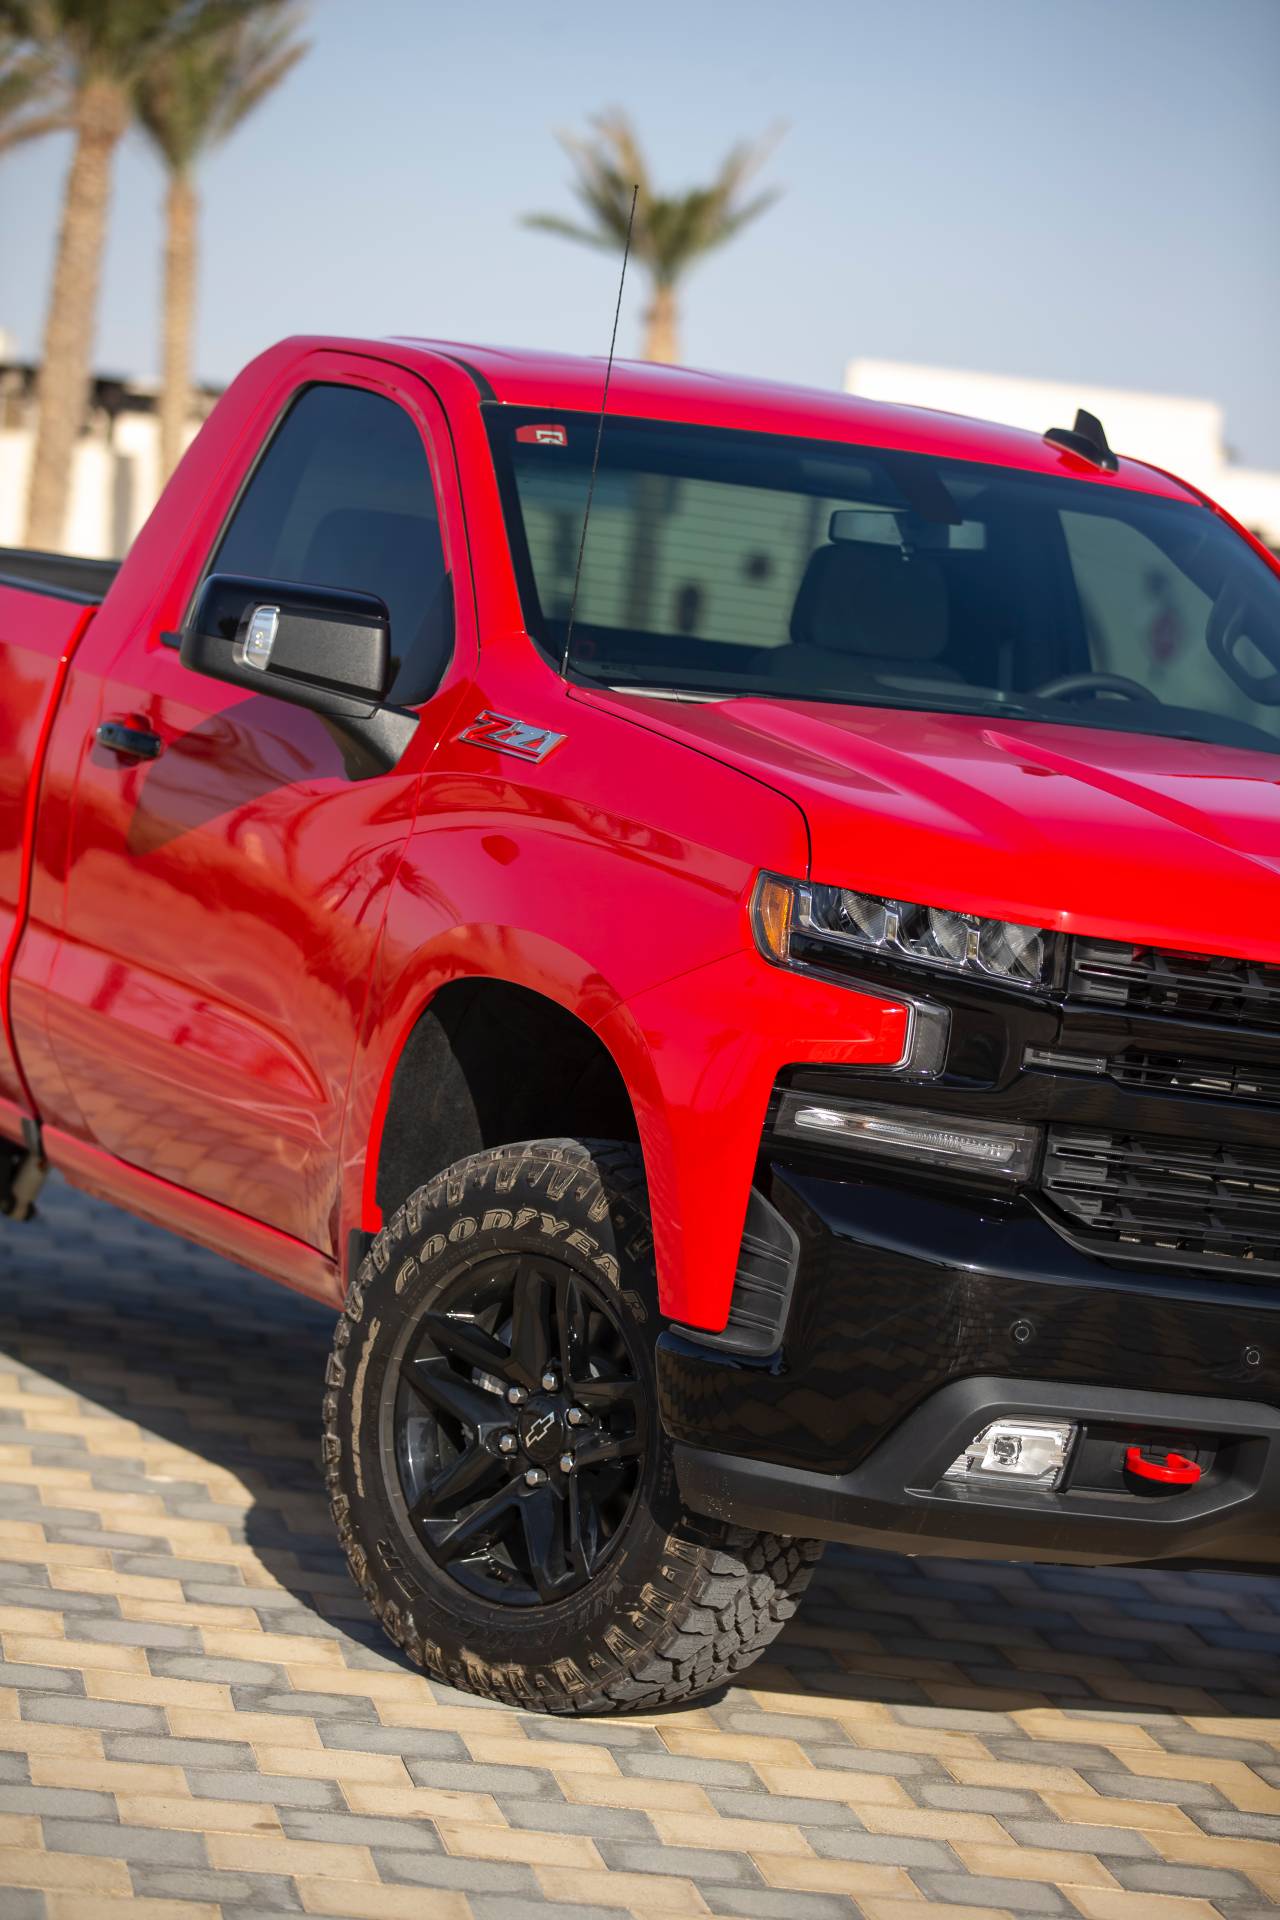 Chevrolet Silverado Electric Pickup Truck Will Be Joined ...